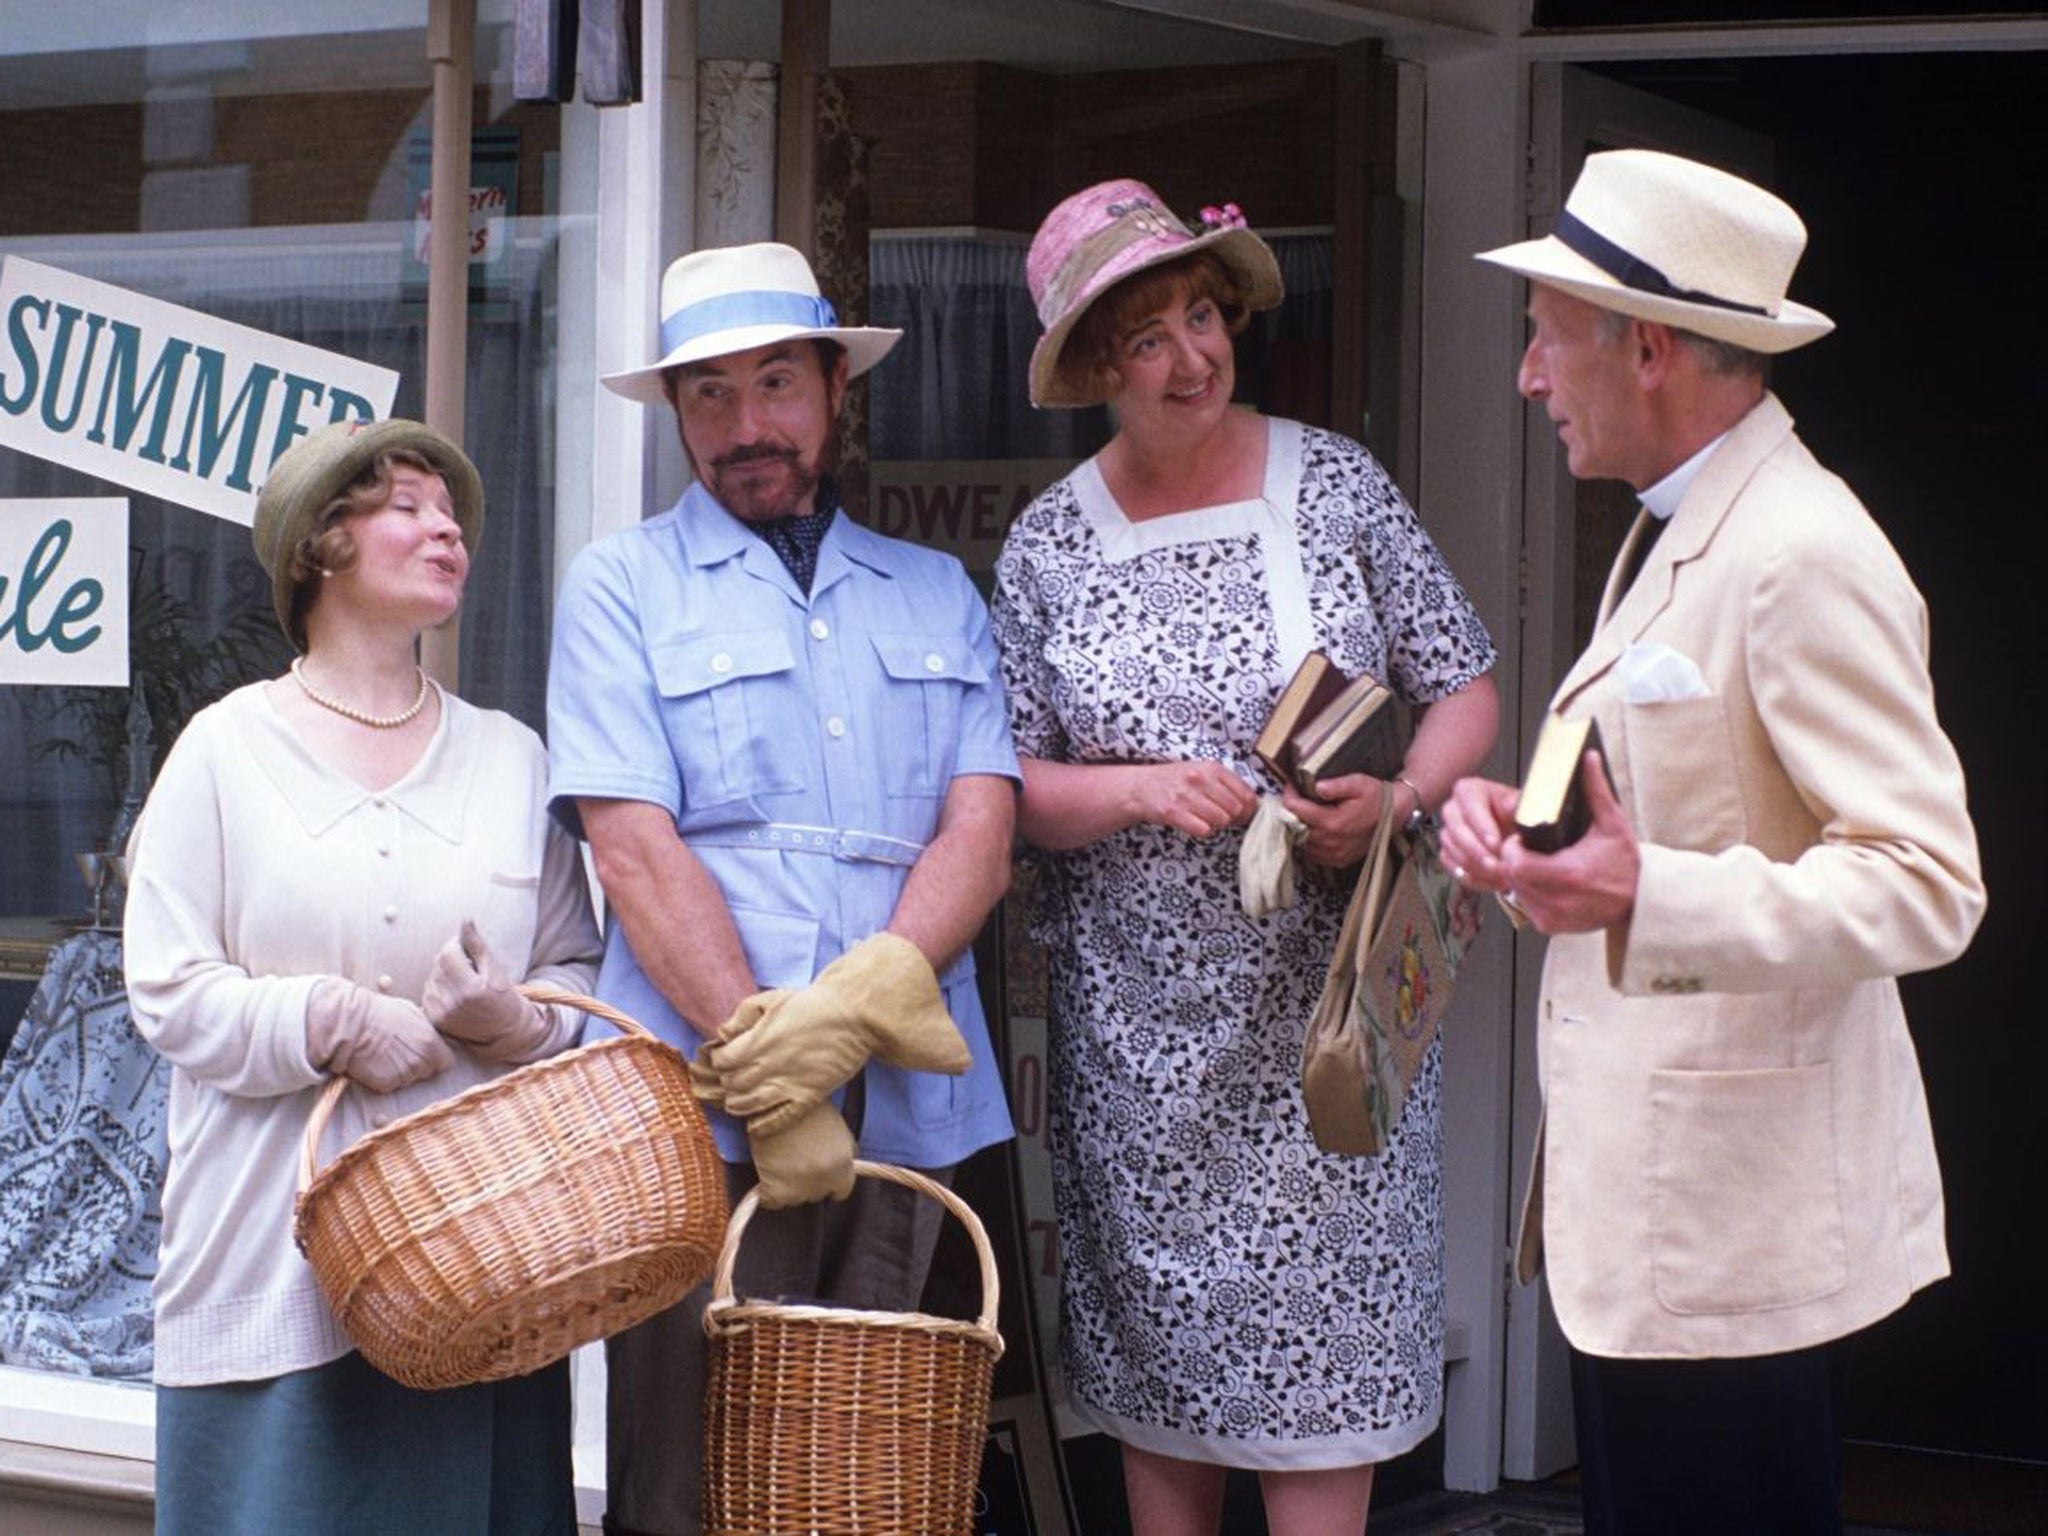 In the basket: Prunella Scales, Nigel Hawthorne, Mary MacLeod and James Greene in the TV classic ‘Mapp and Lucia’